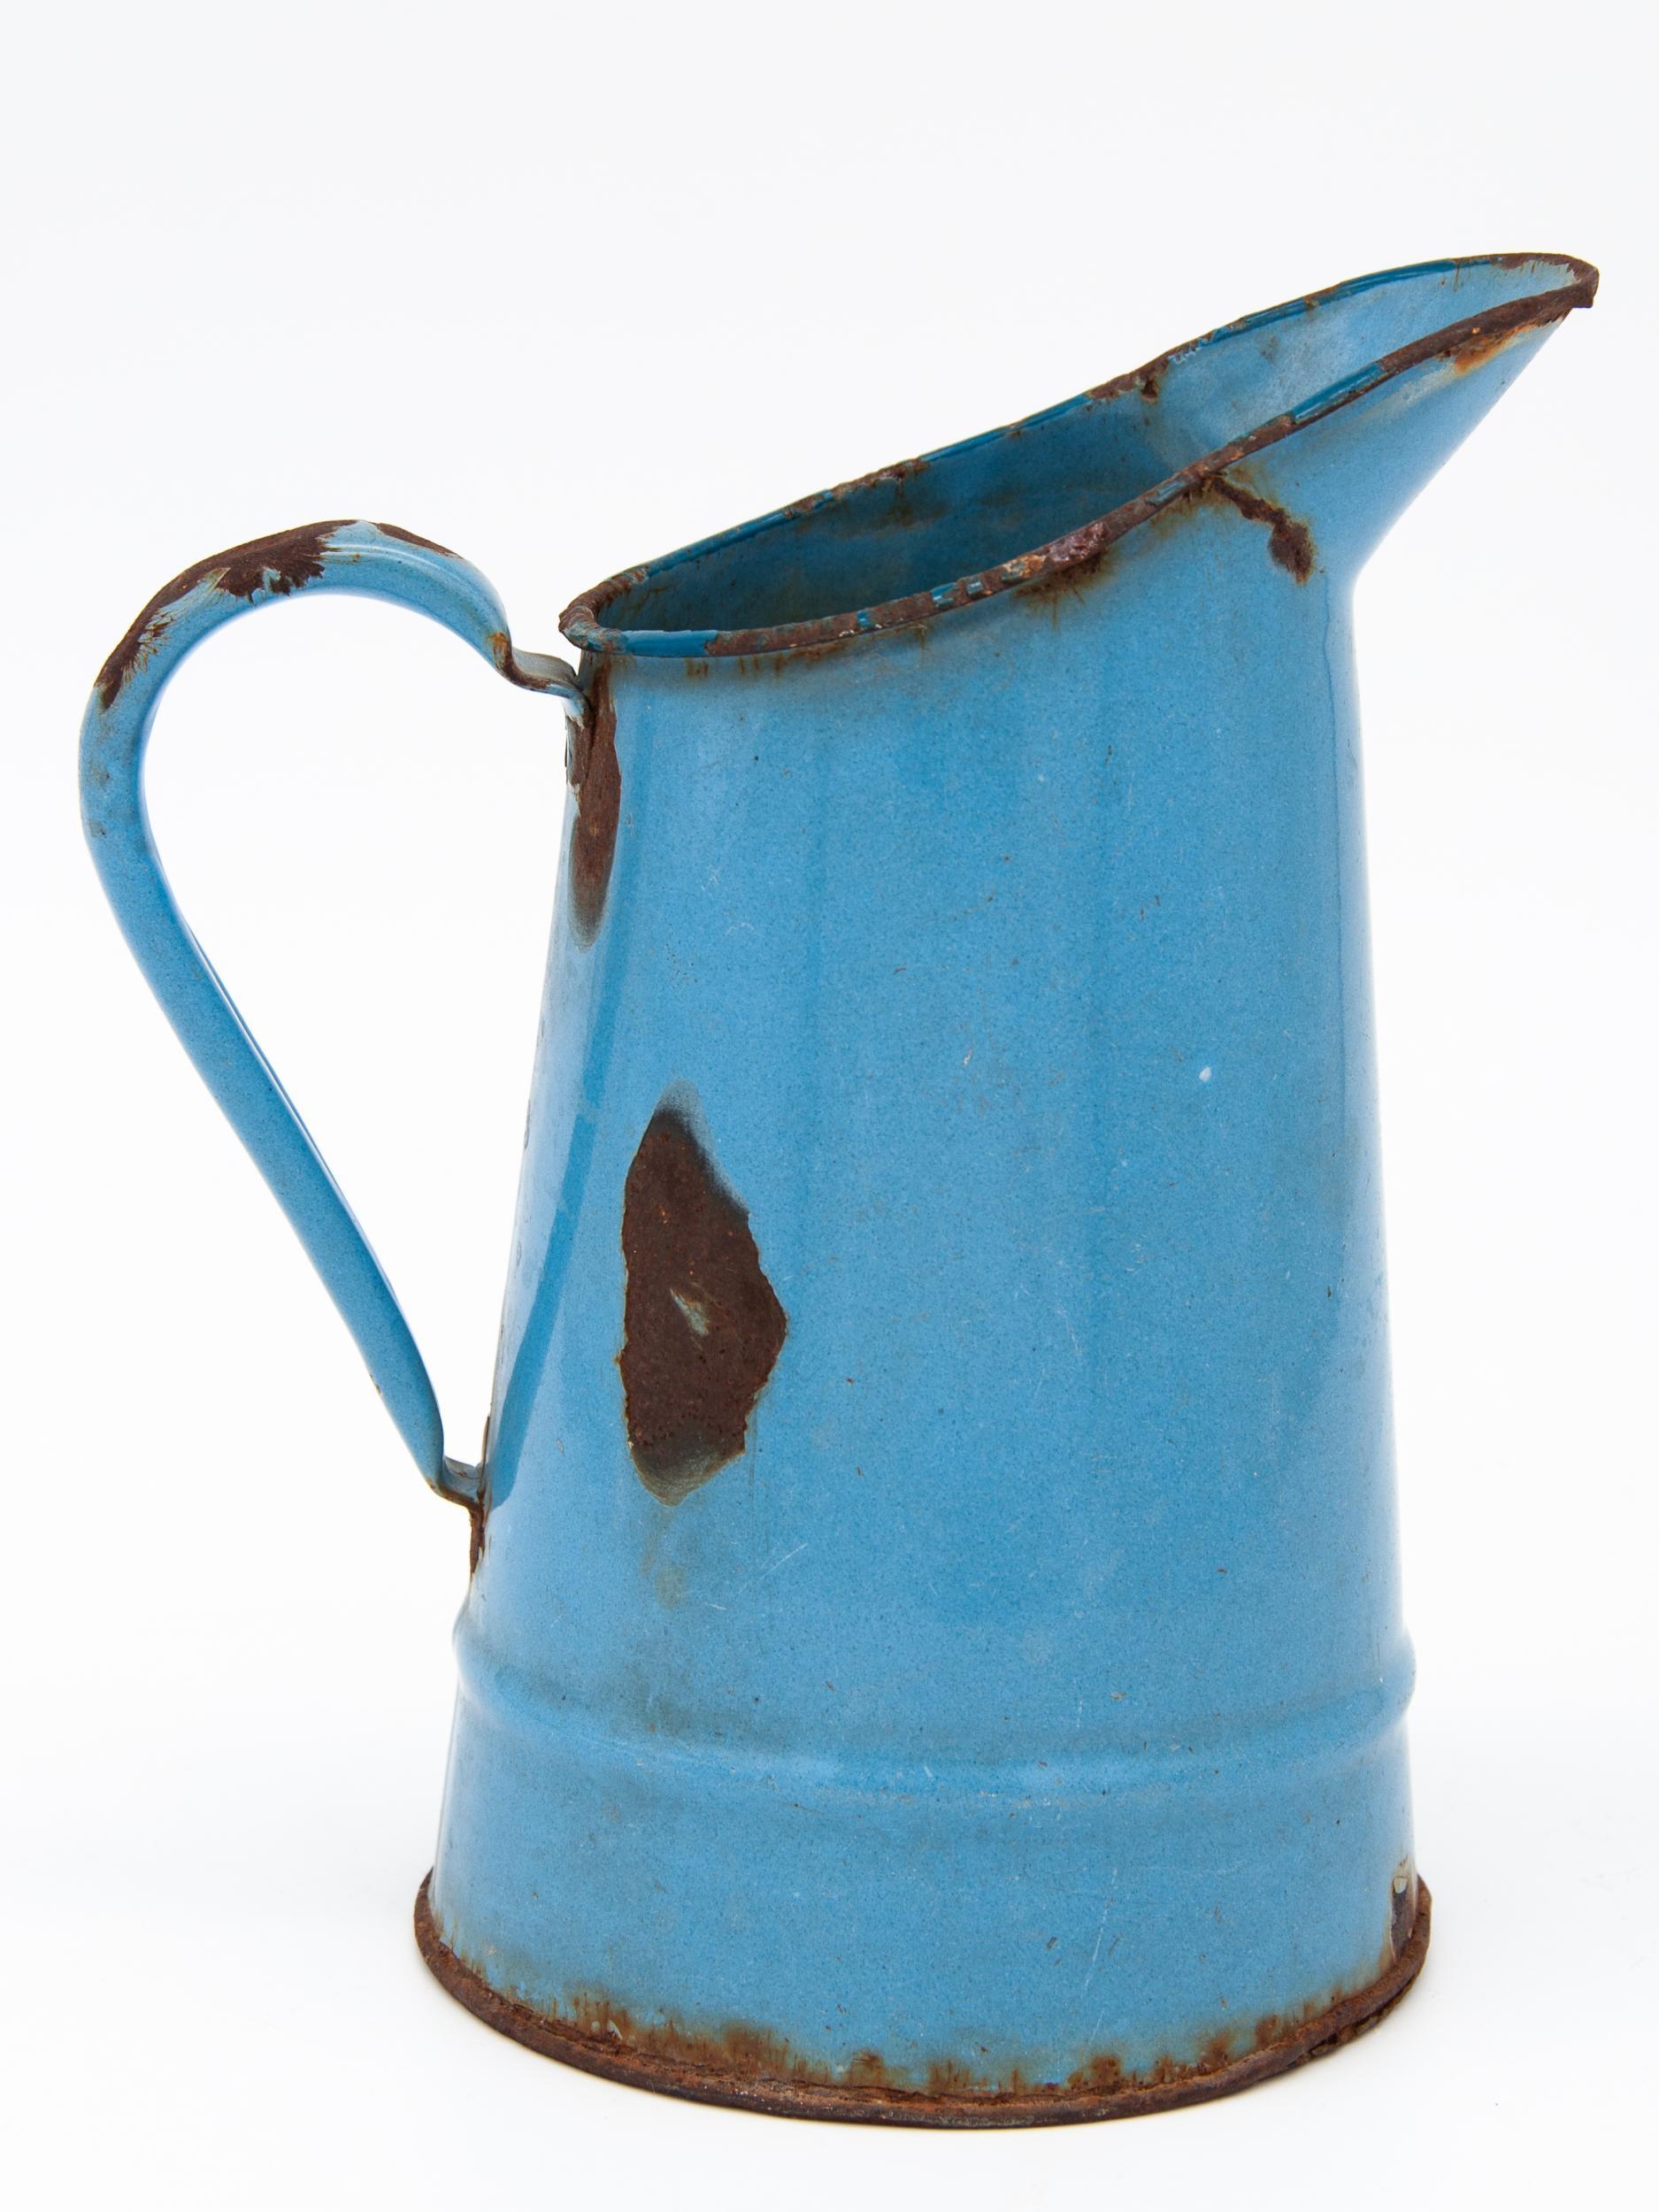 This tin pitcher has some paint chipping and rust, but this makes it a perfect decorative object. Beautiful on a bookcase or functional as a watering can. This brings color, texture and depth into a space without having to choose a larger piece for